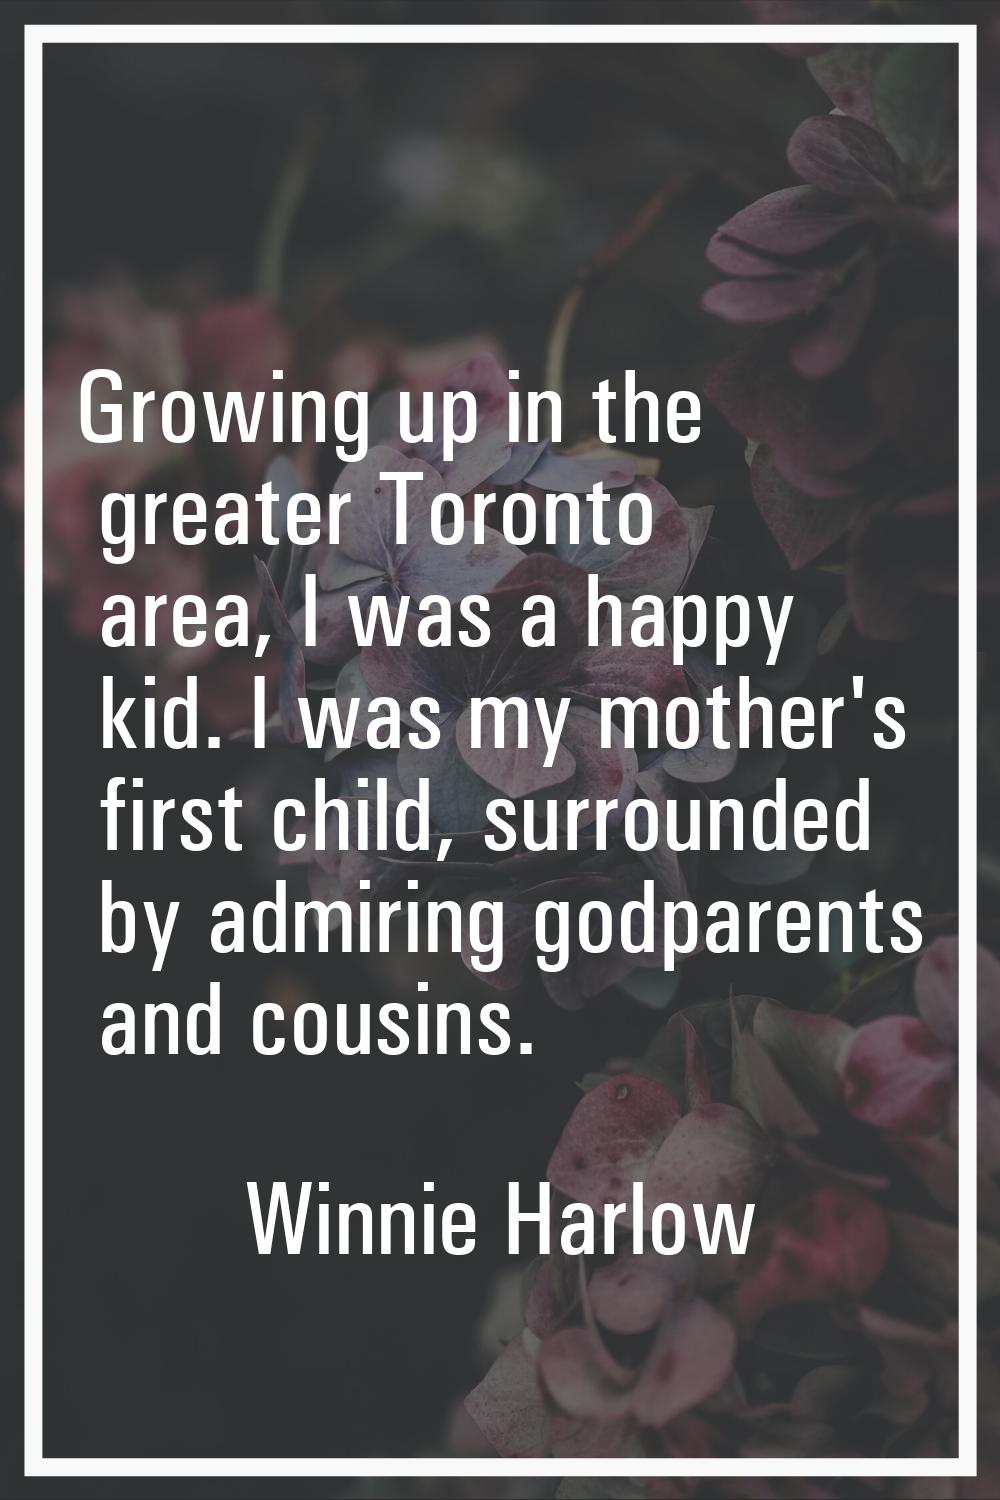 Growing up in the greater Toronto area, I was a happy kid. I was my mother's first child, surrounde